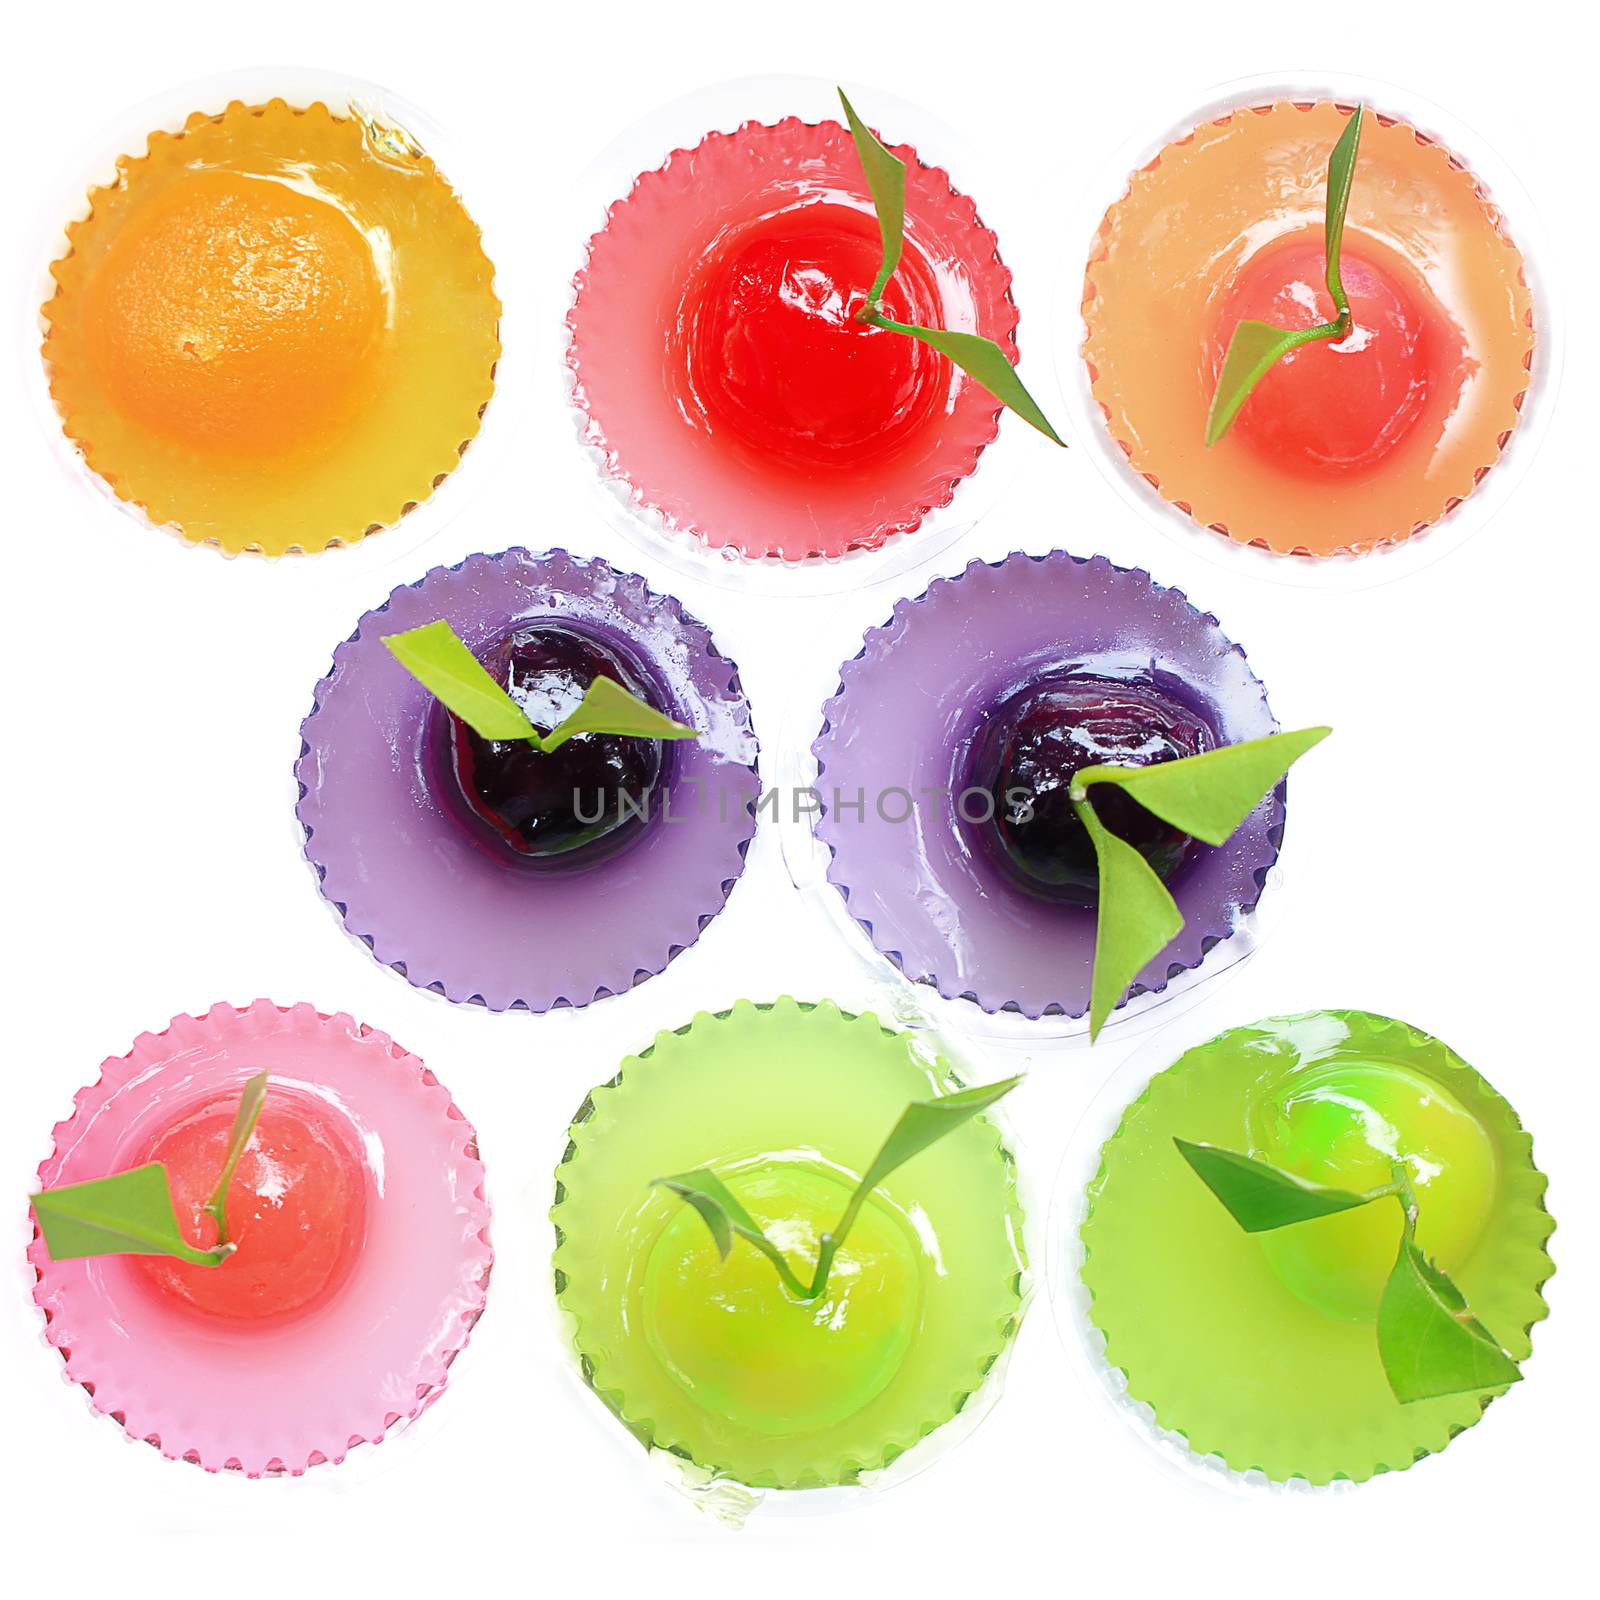 Different colored jelly sweets with white background